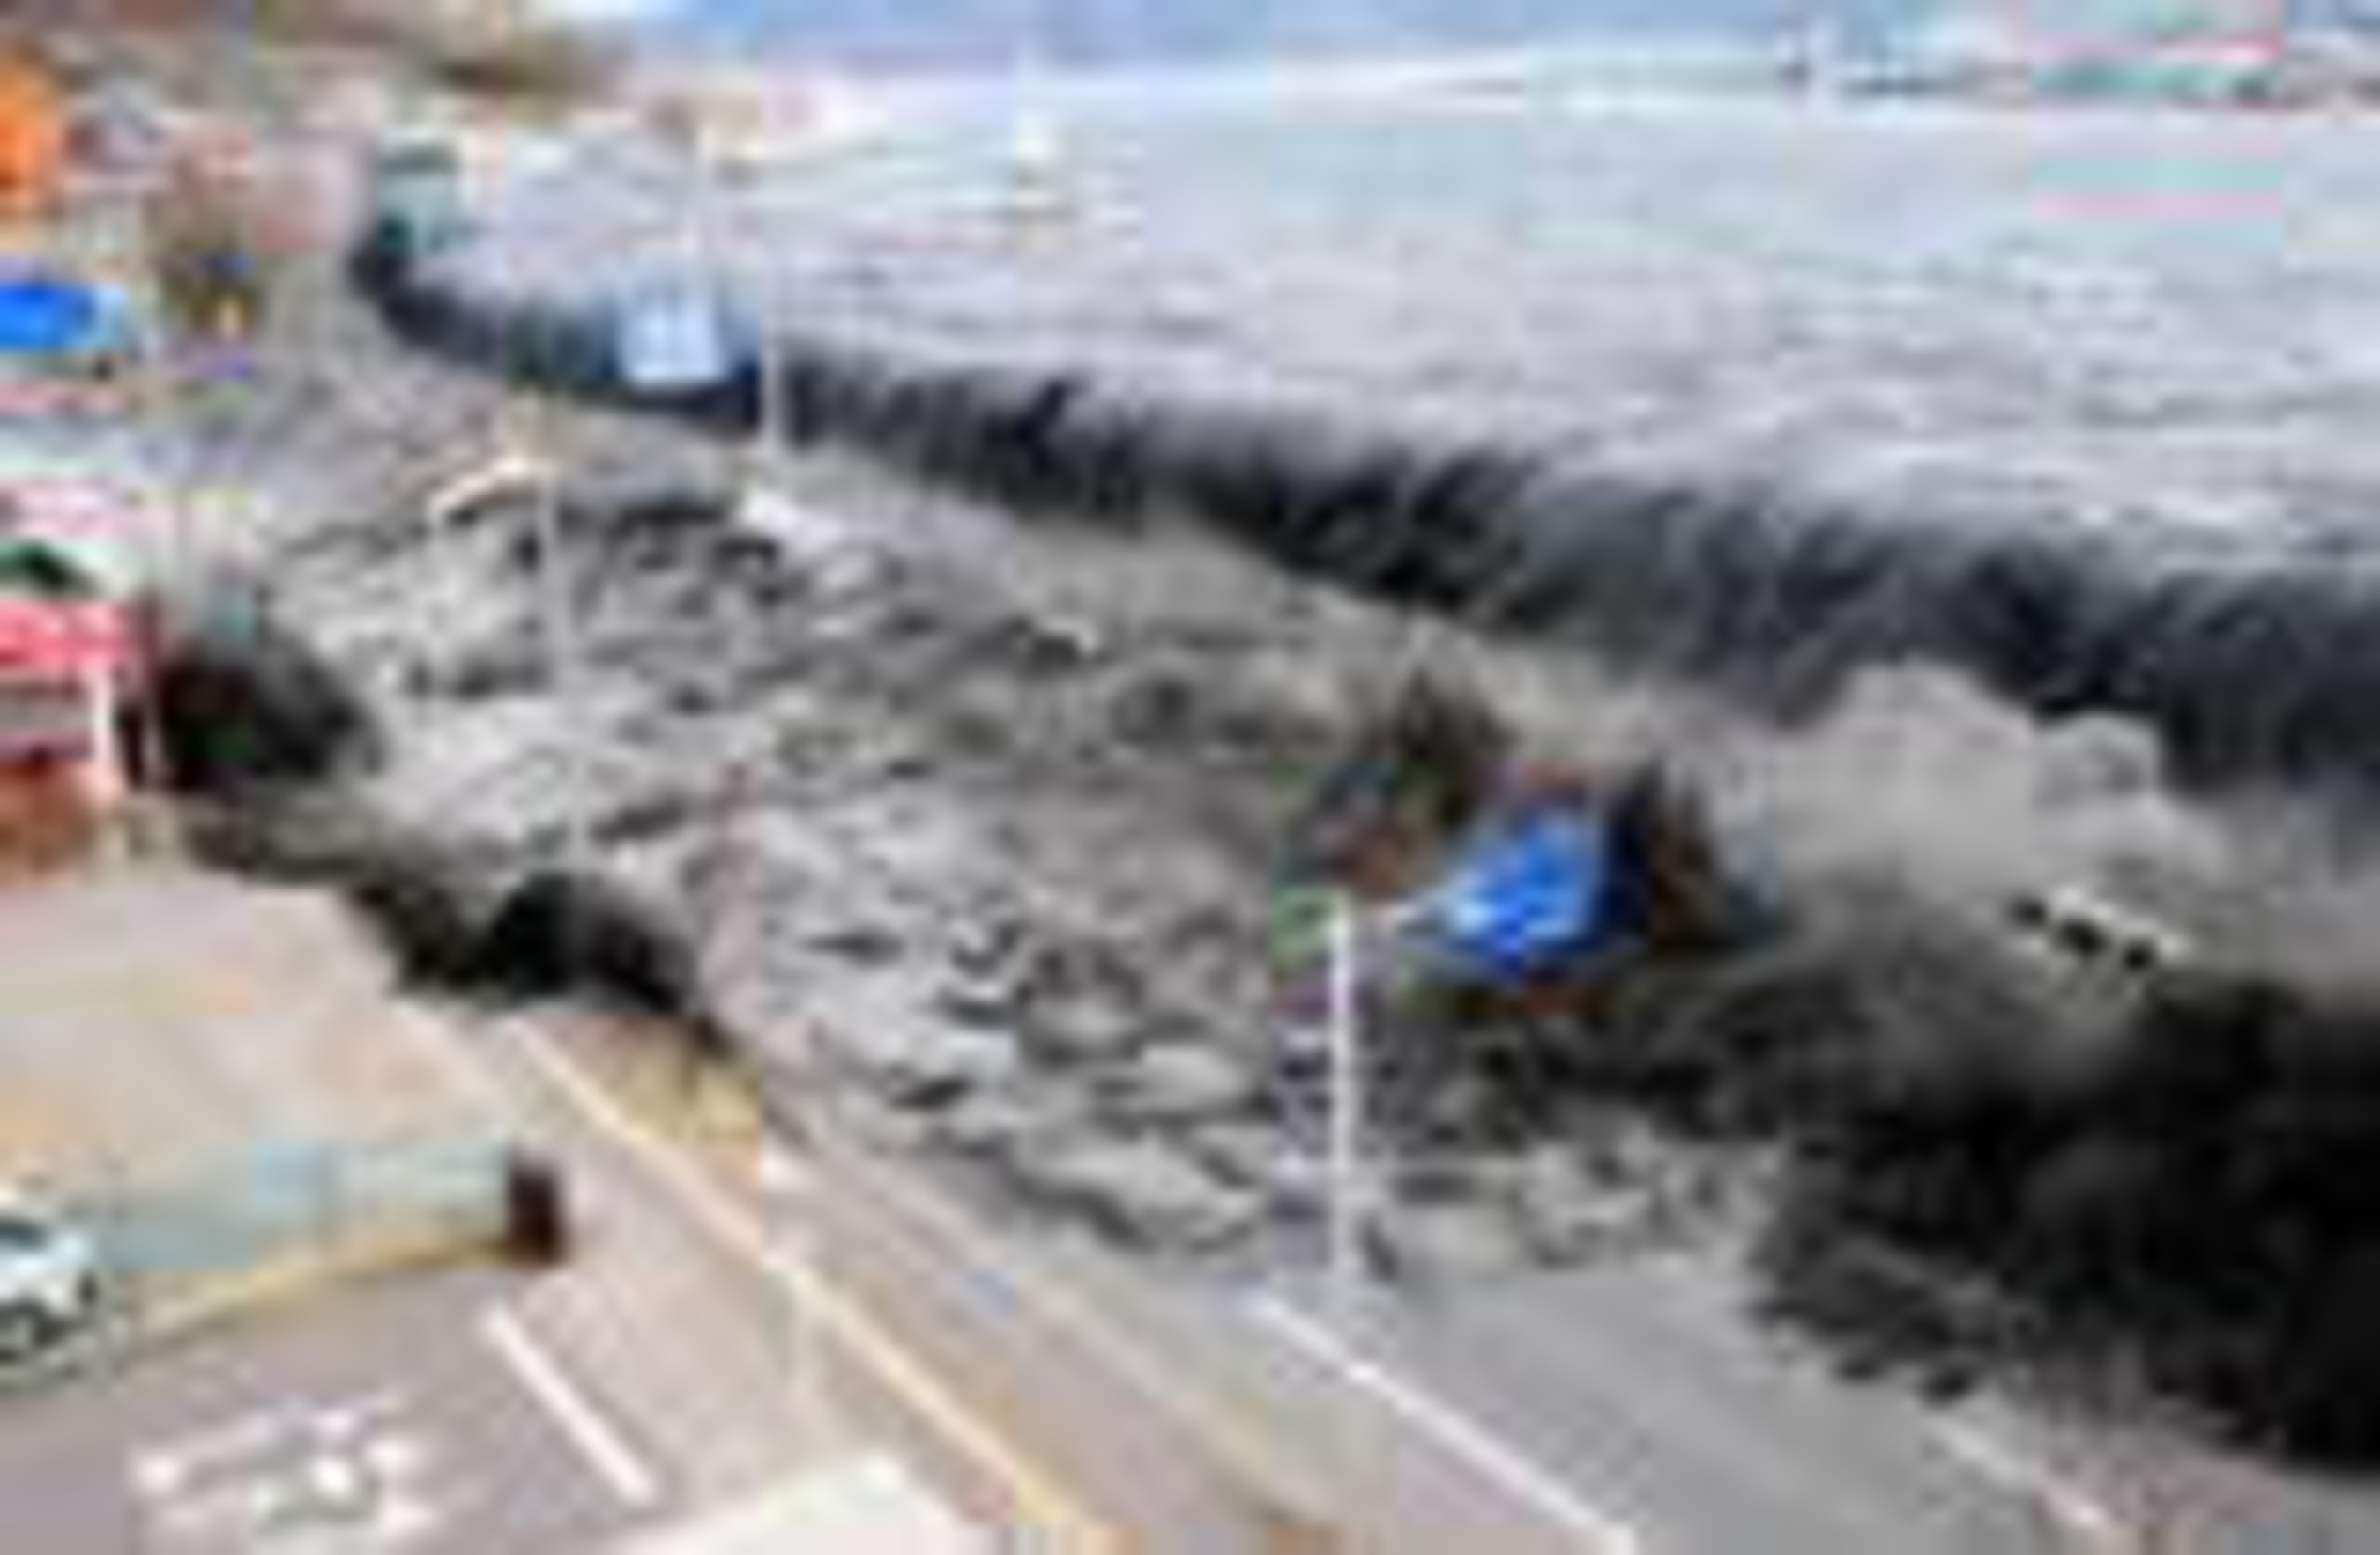 Tsunami overwhelms barrier of Miyako City on March 11, 2011...one of 200 such barriers that failed on that fateful day. (PRNewsFoto/The Hiroshima Syndrome) (PRNewsFoto/THE HIROSHIMA SYNDROME)